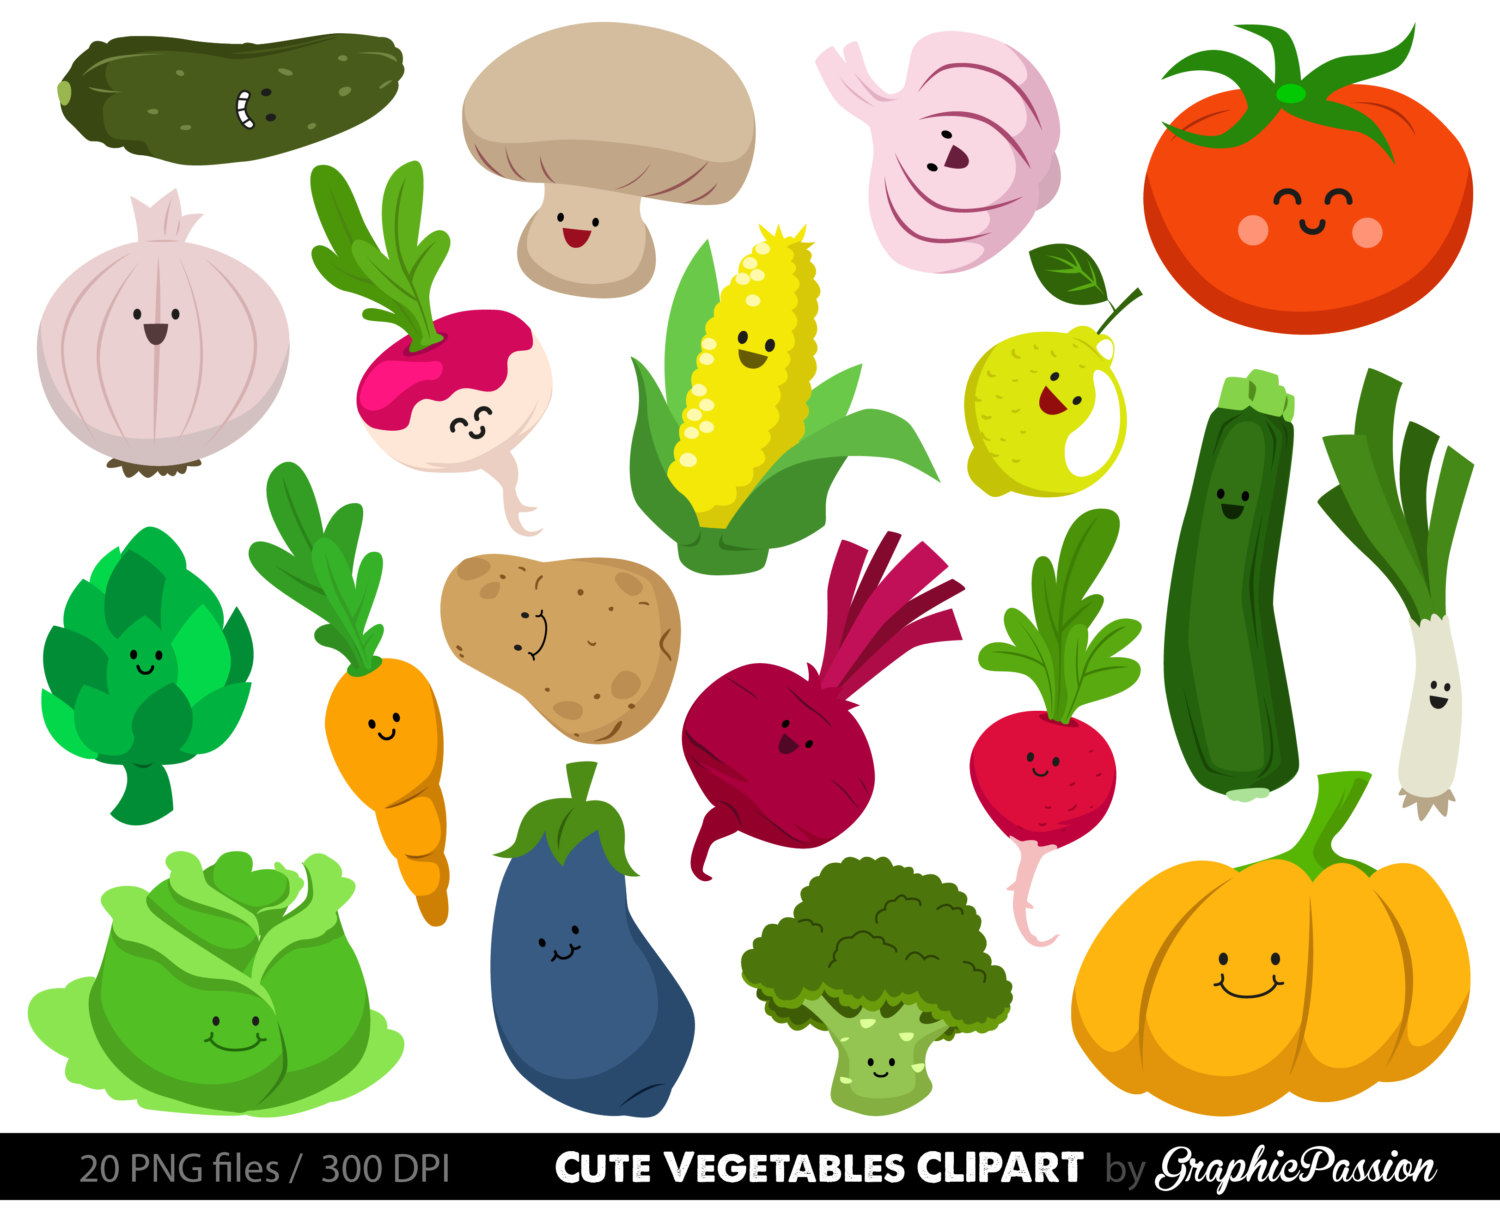 leafy vegetables clipart - photo #48